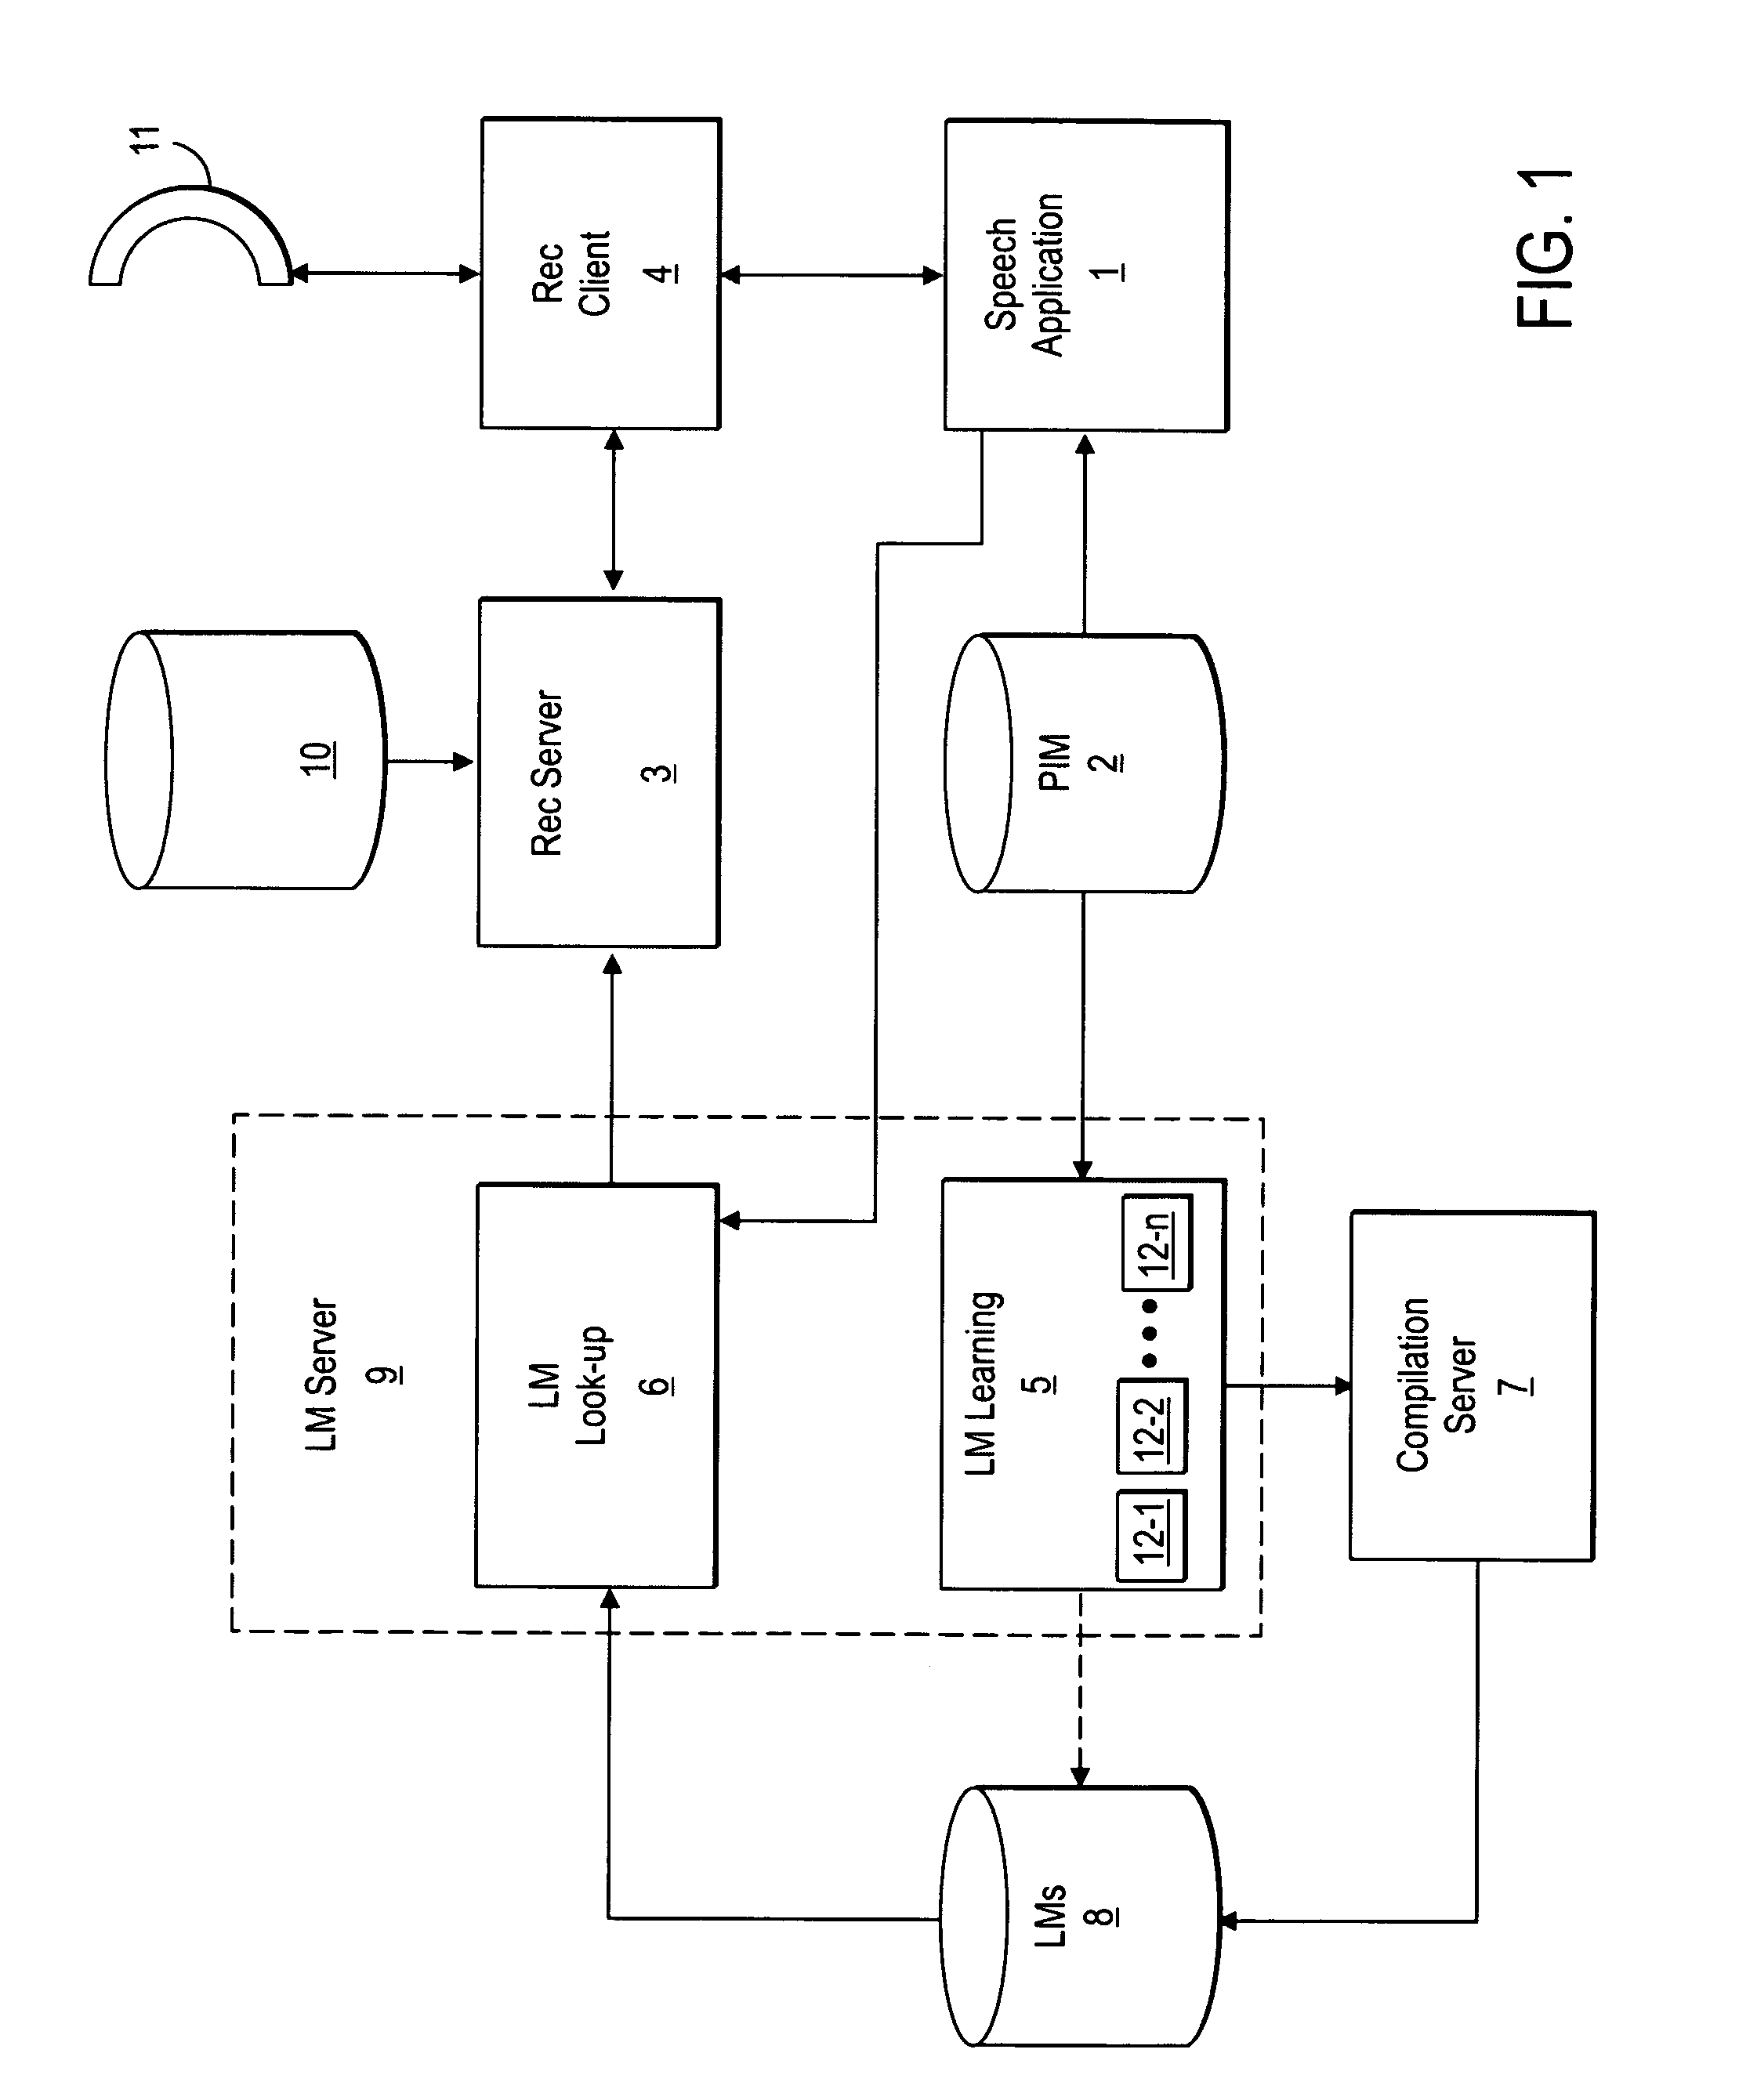 Method and apparatus for improving human-machine dialogs using language models learned automatically from personalized data